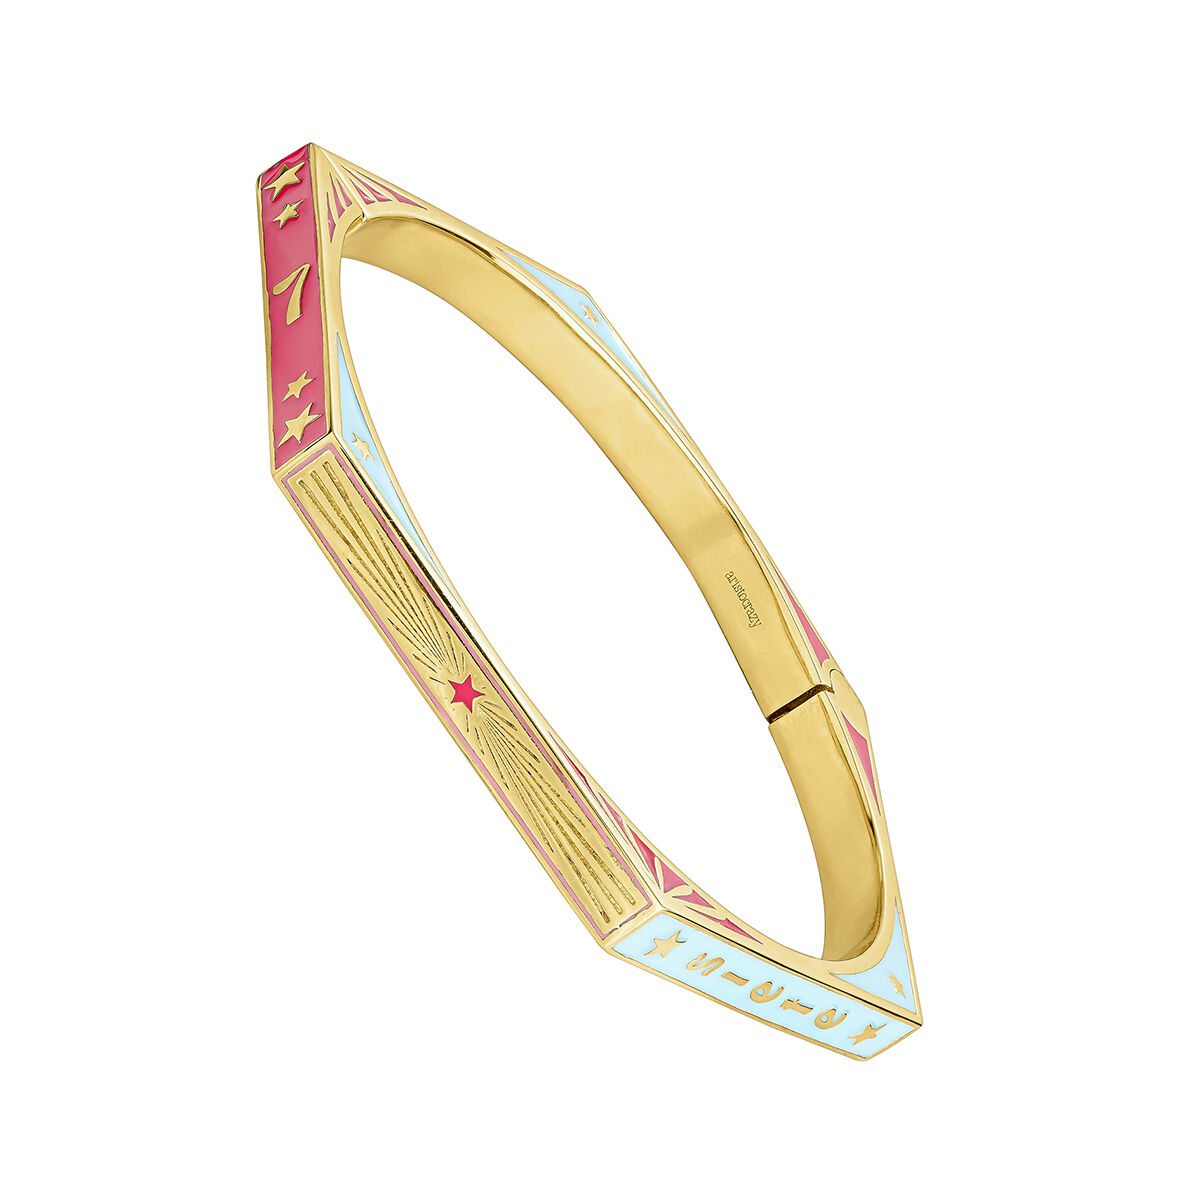 18k gold-plated silver hexagonal rigid bracelet with colors and a number 7, J05088-02-MULENA, hi-res